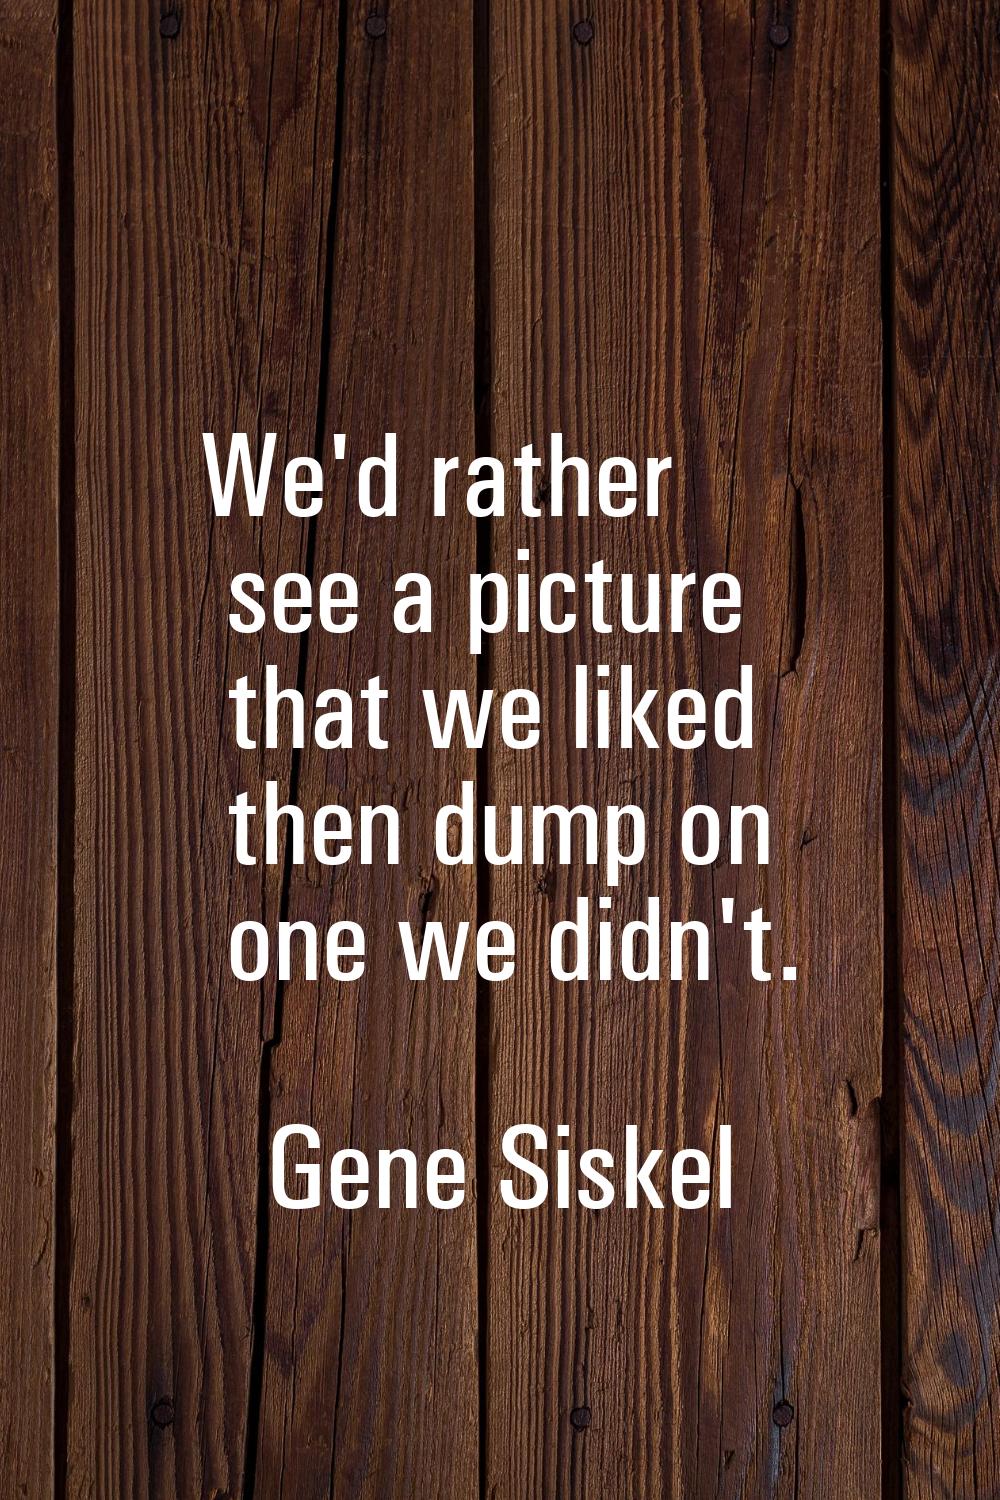 We'd rather see a picture that we liked then dump on one we didn't.